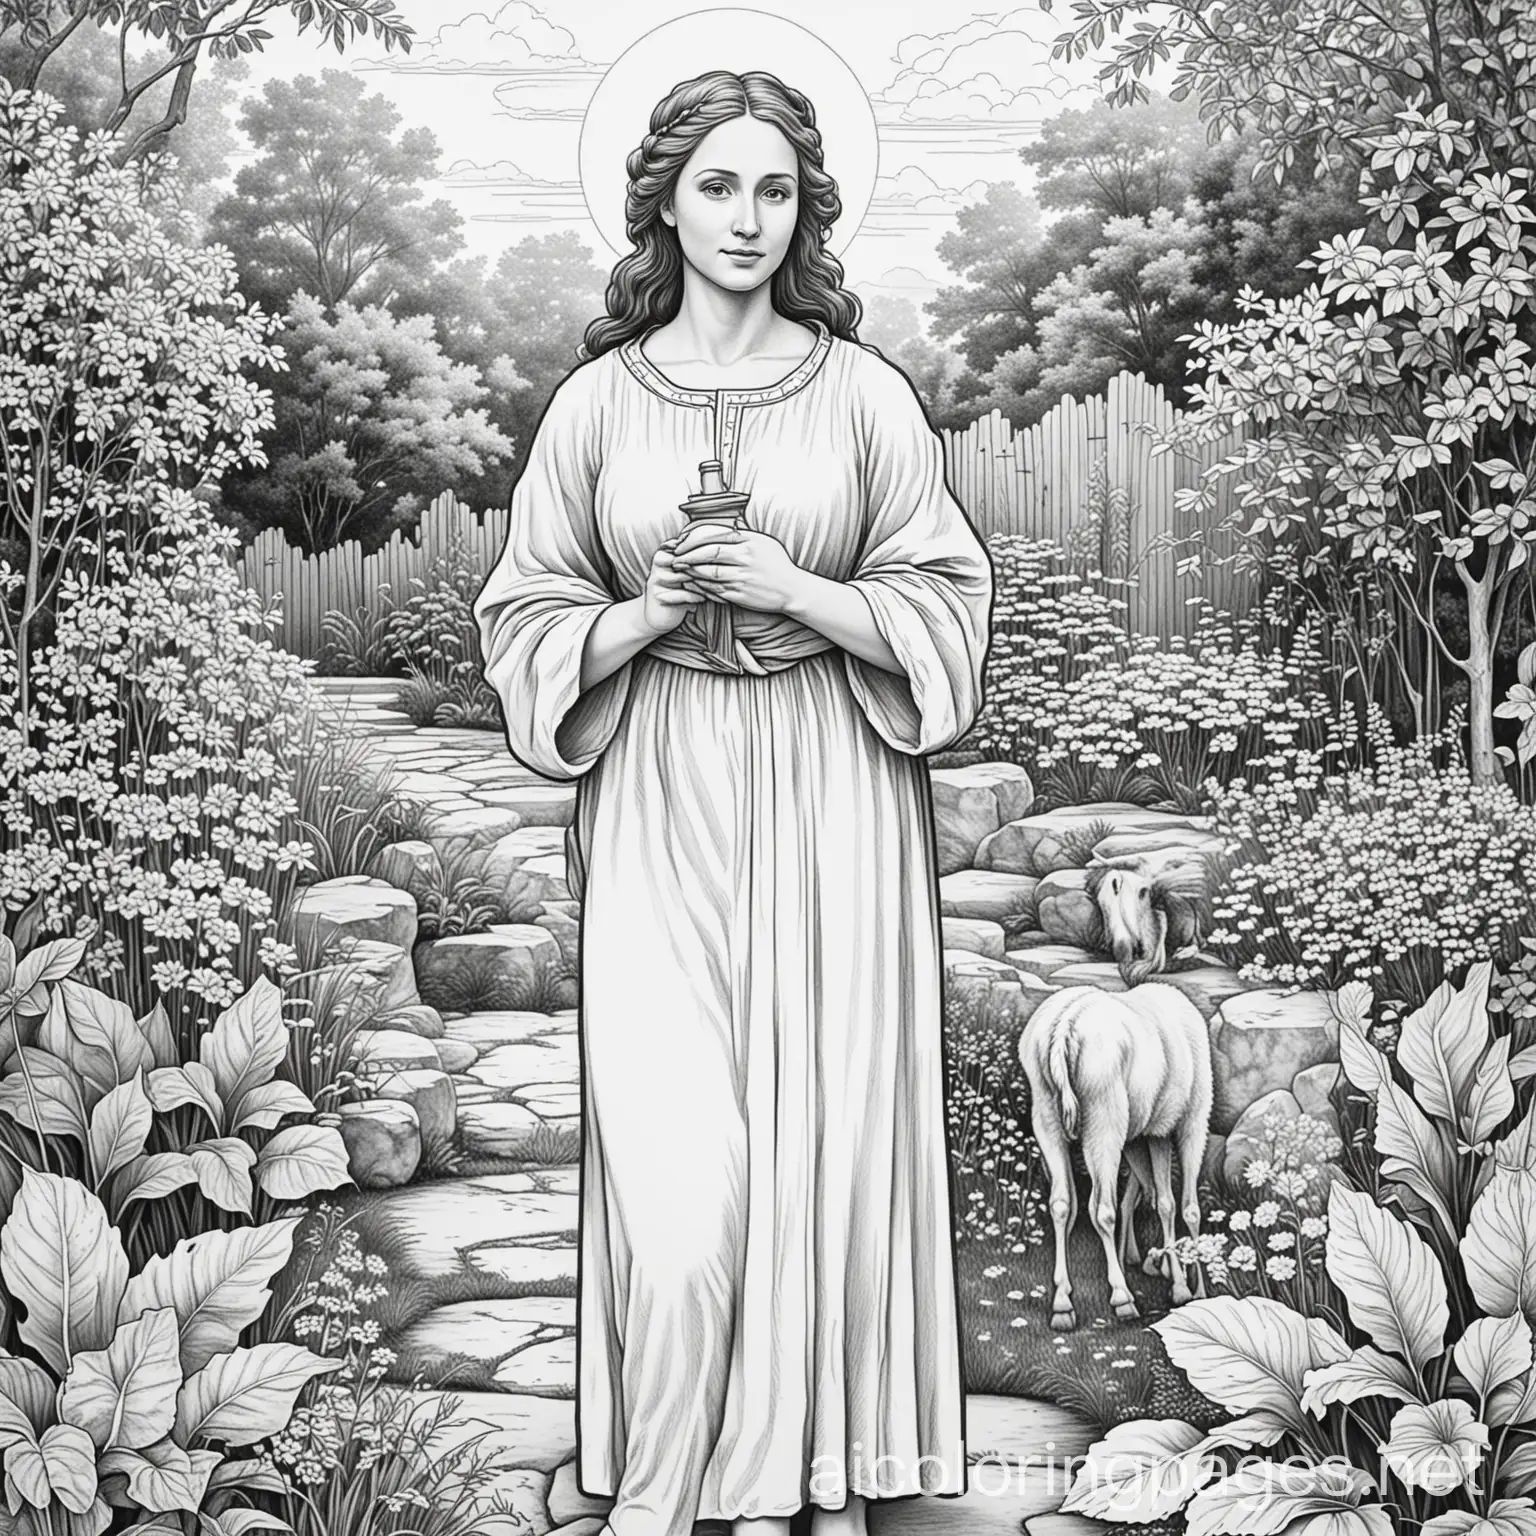 Elizabeth-Mother-of-John-the-Baptist-Coloring-Page-in-Garden